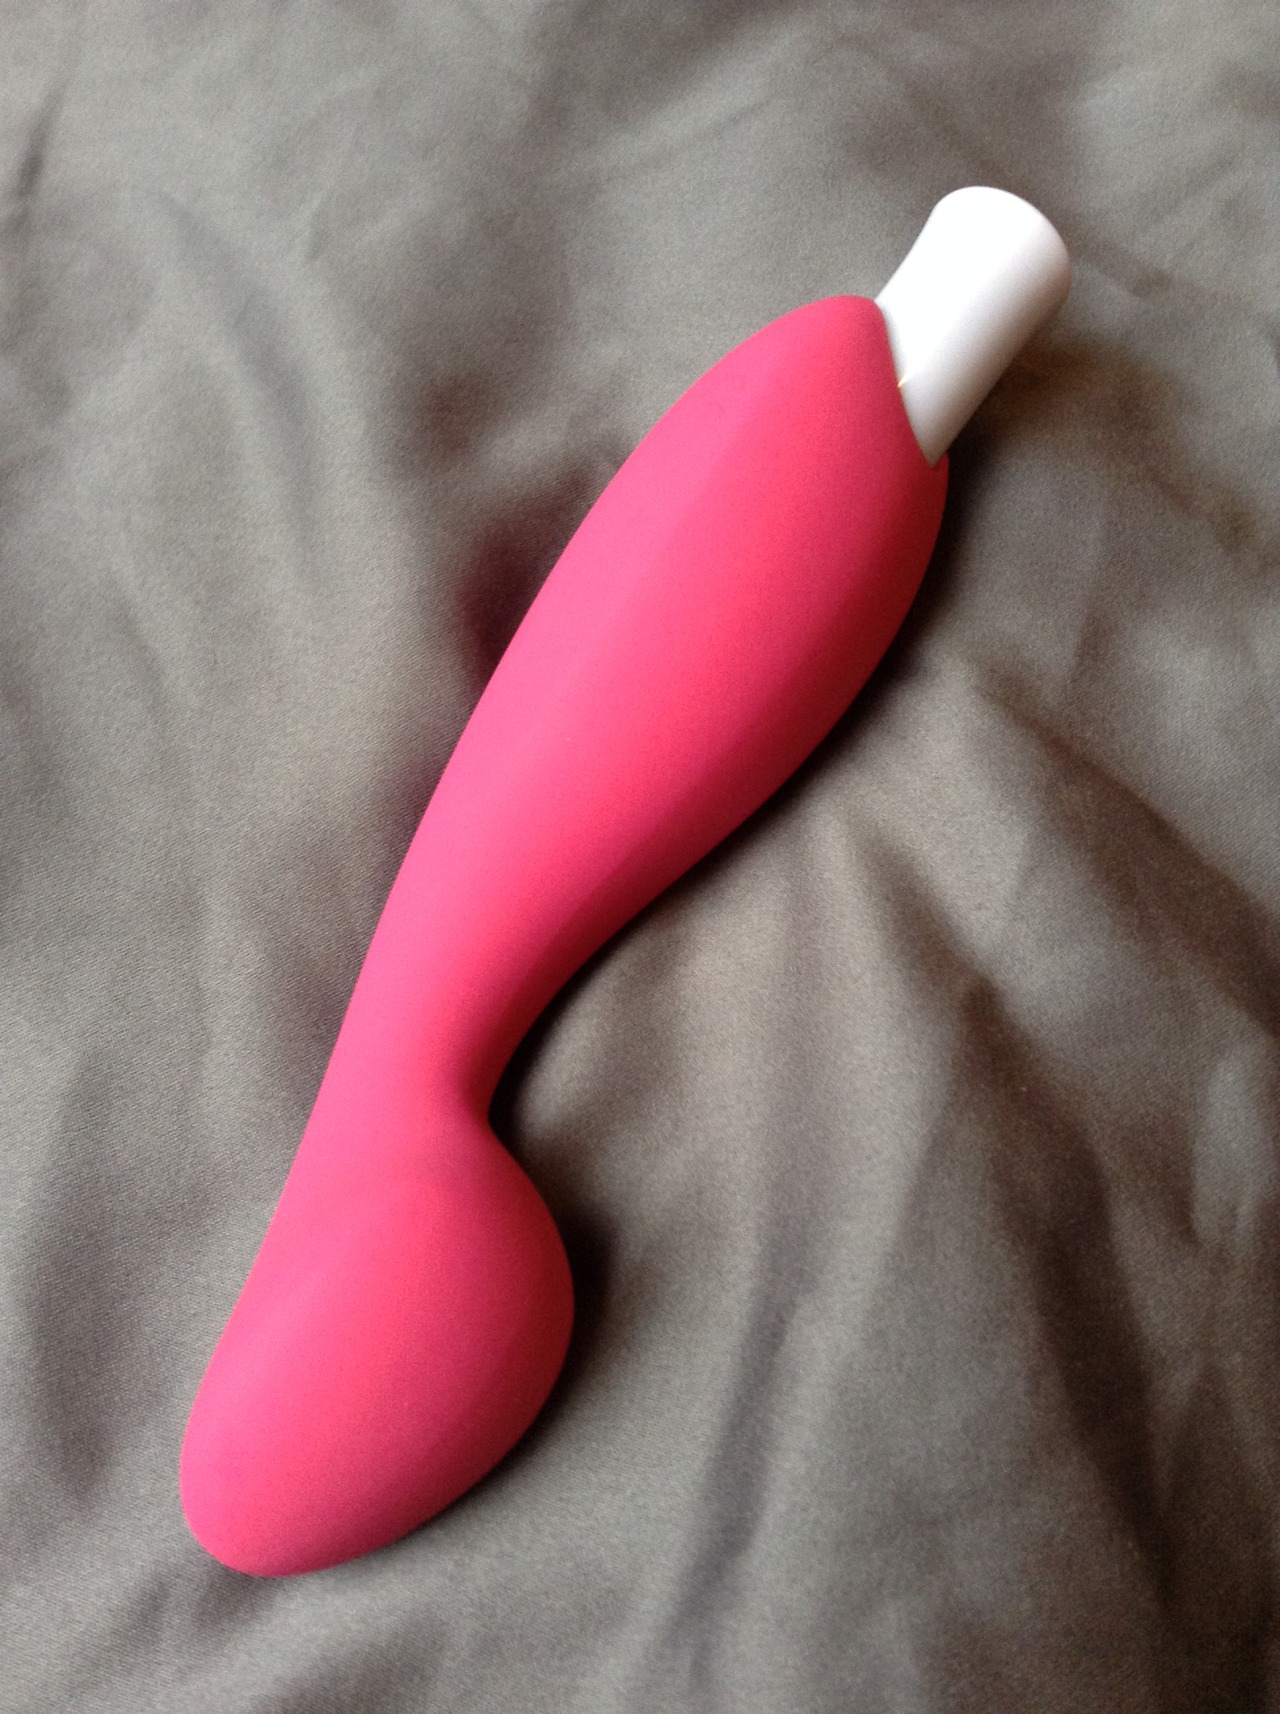 Pillow Princess Reviews — Its a pleasure, mate a review of the We-Vibe... pic